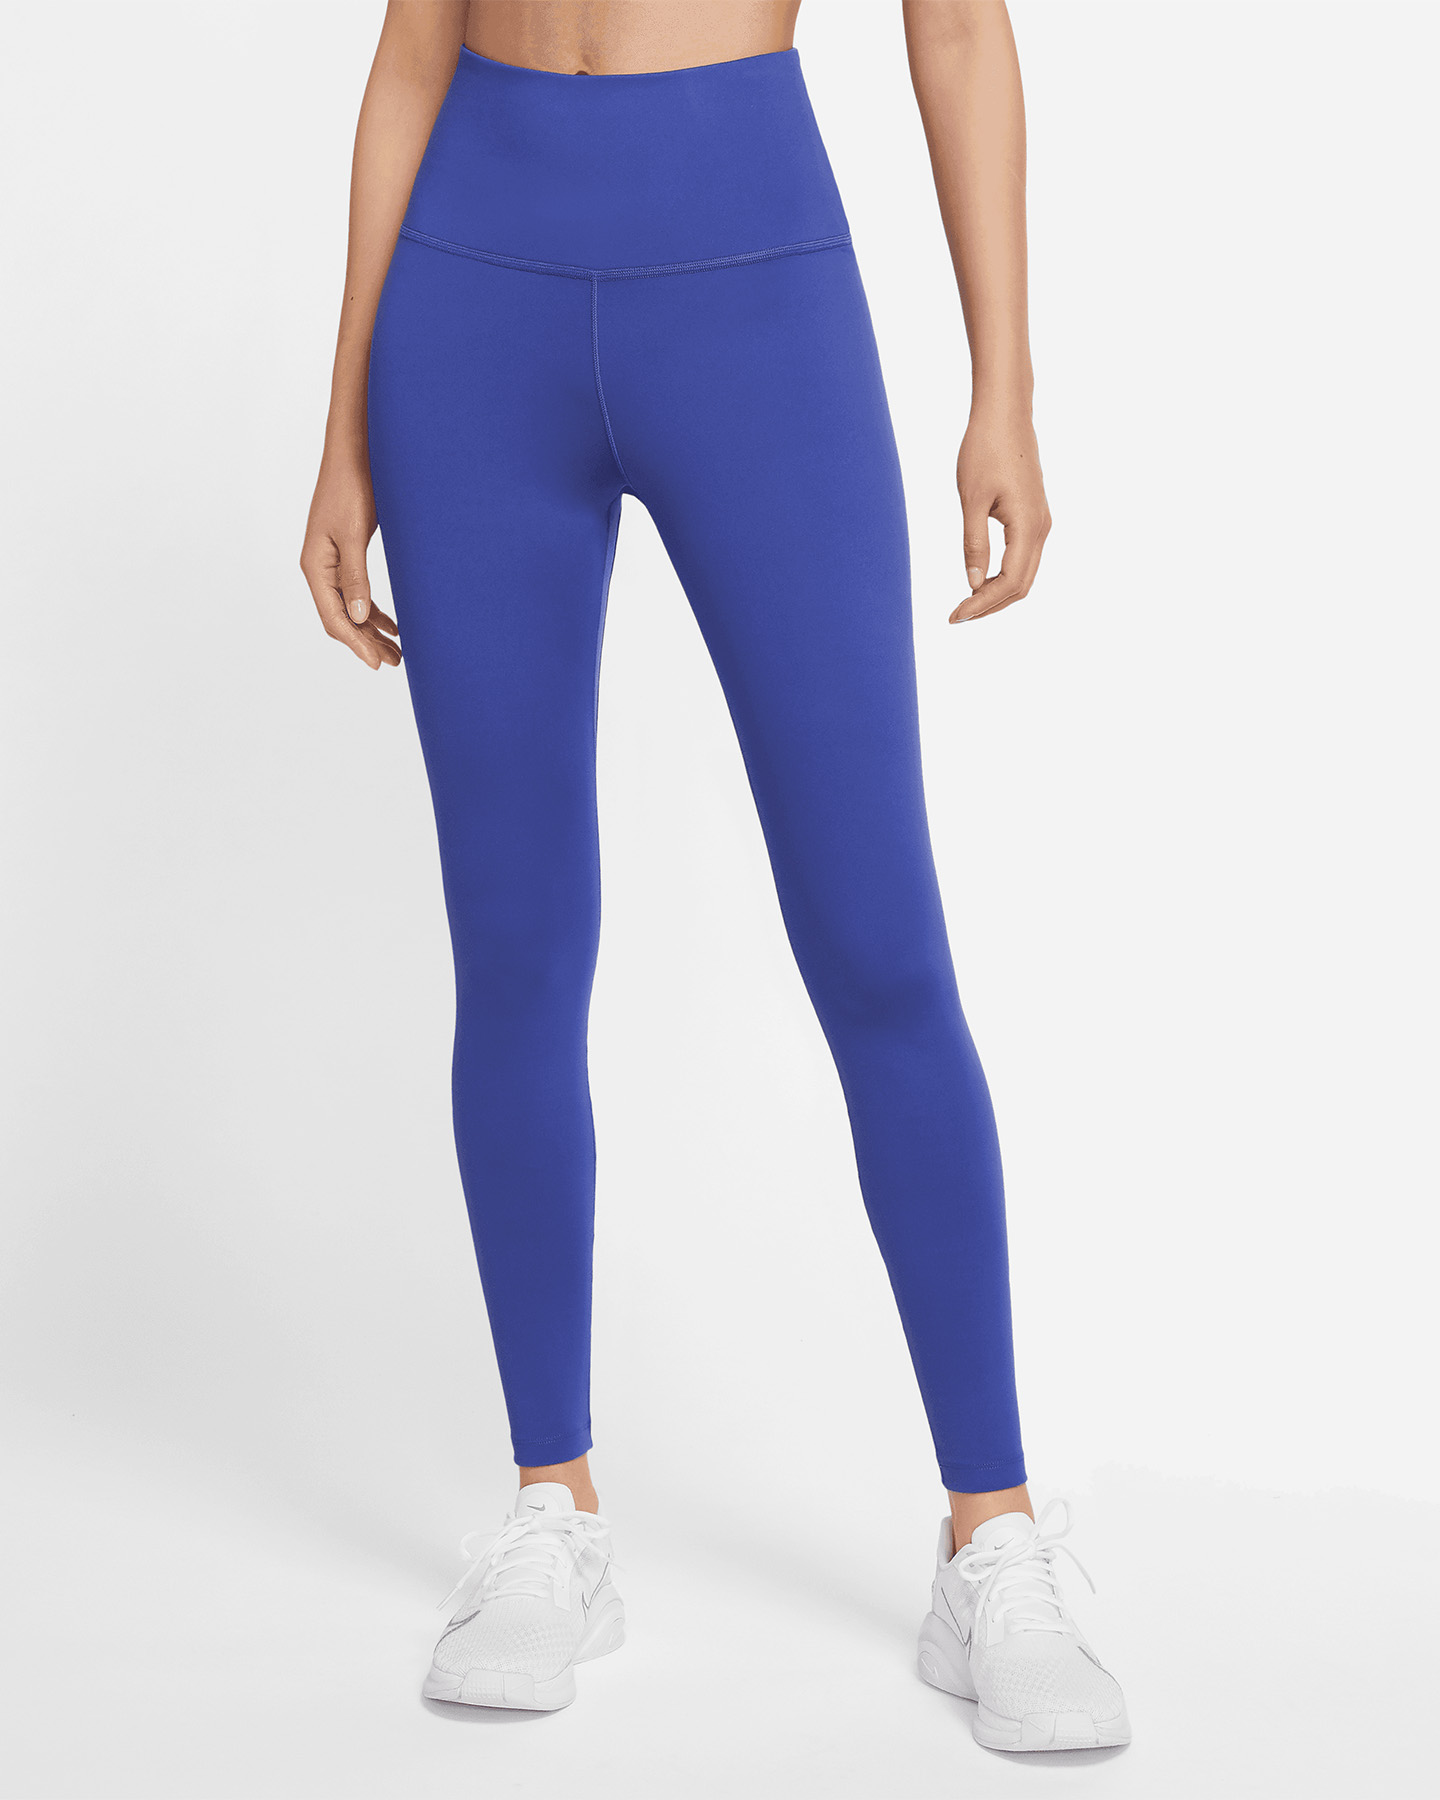 Image of Nike - Poly One W - Leggings - Donna